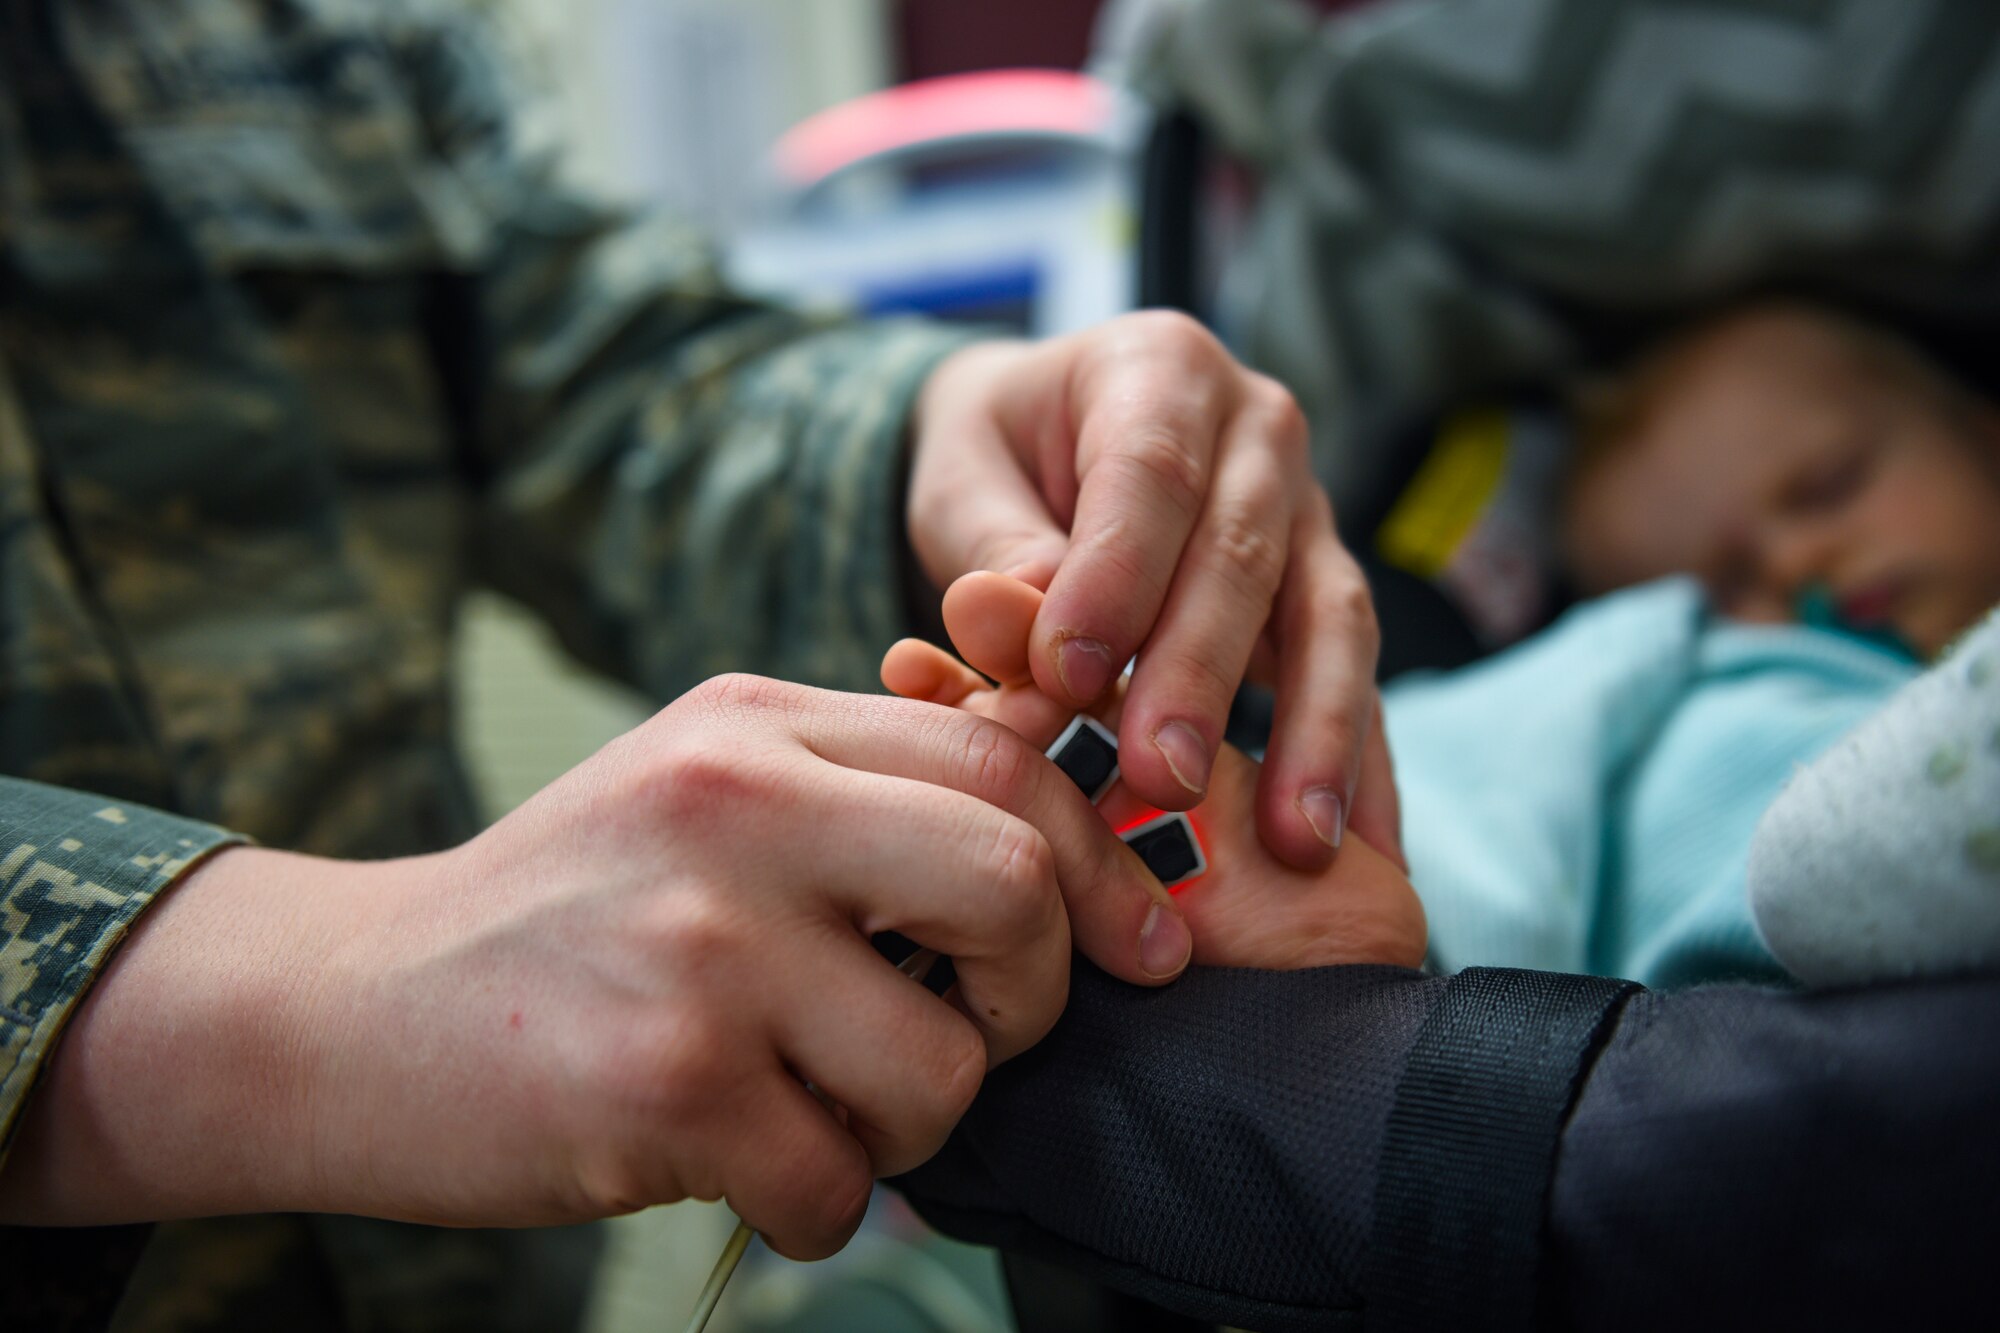 Airman 1st Class Levi Brown, 92nd Medical Group aerospace medical technician, monitors the oxygen saturation of a patient’s blood during a check-up April 4, 2018, at Fairchild Air Force Base, Washington. The pediatric team has implemented a new concept of operations: rewarding, efficiency, setting priorities and empowering team members, or RESET, to their system of patient care. The integration of RESET in the Military Health System Genesis workflow has improved the clinic’s goals of patient access and care. (U.S. Air Force photo/Airman 1st Class Whitney Laine)